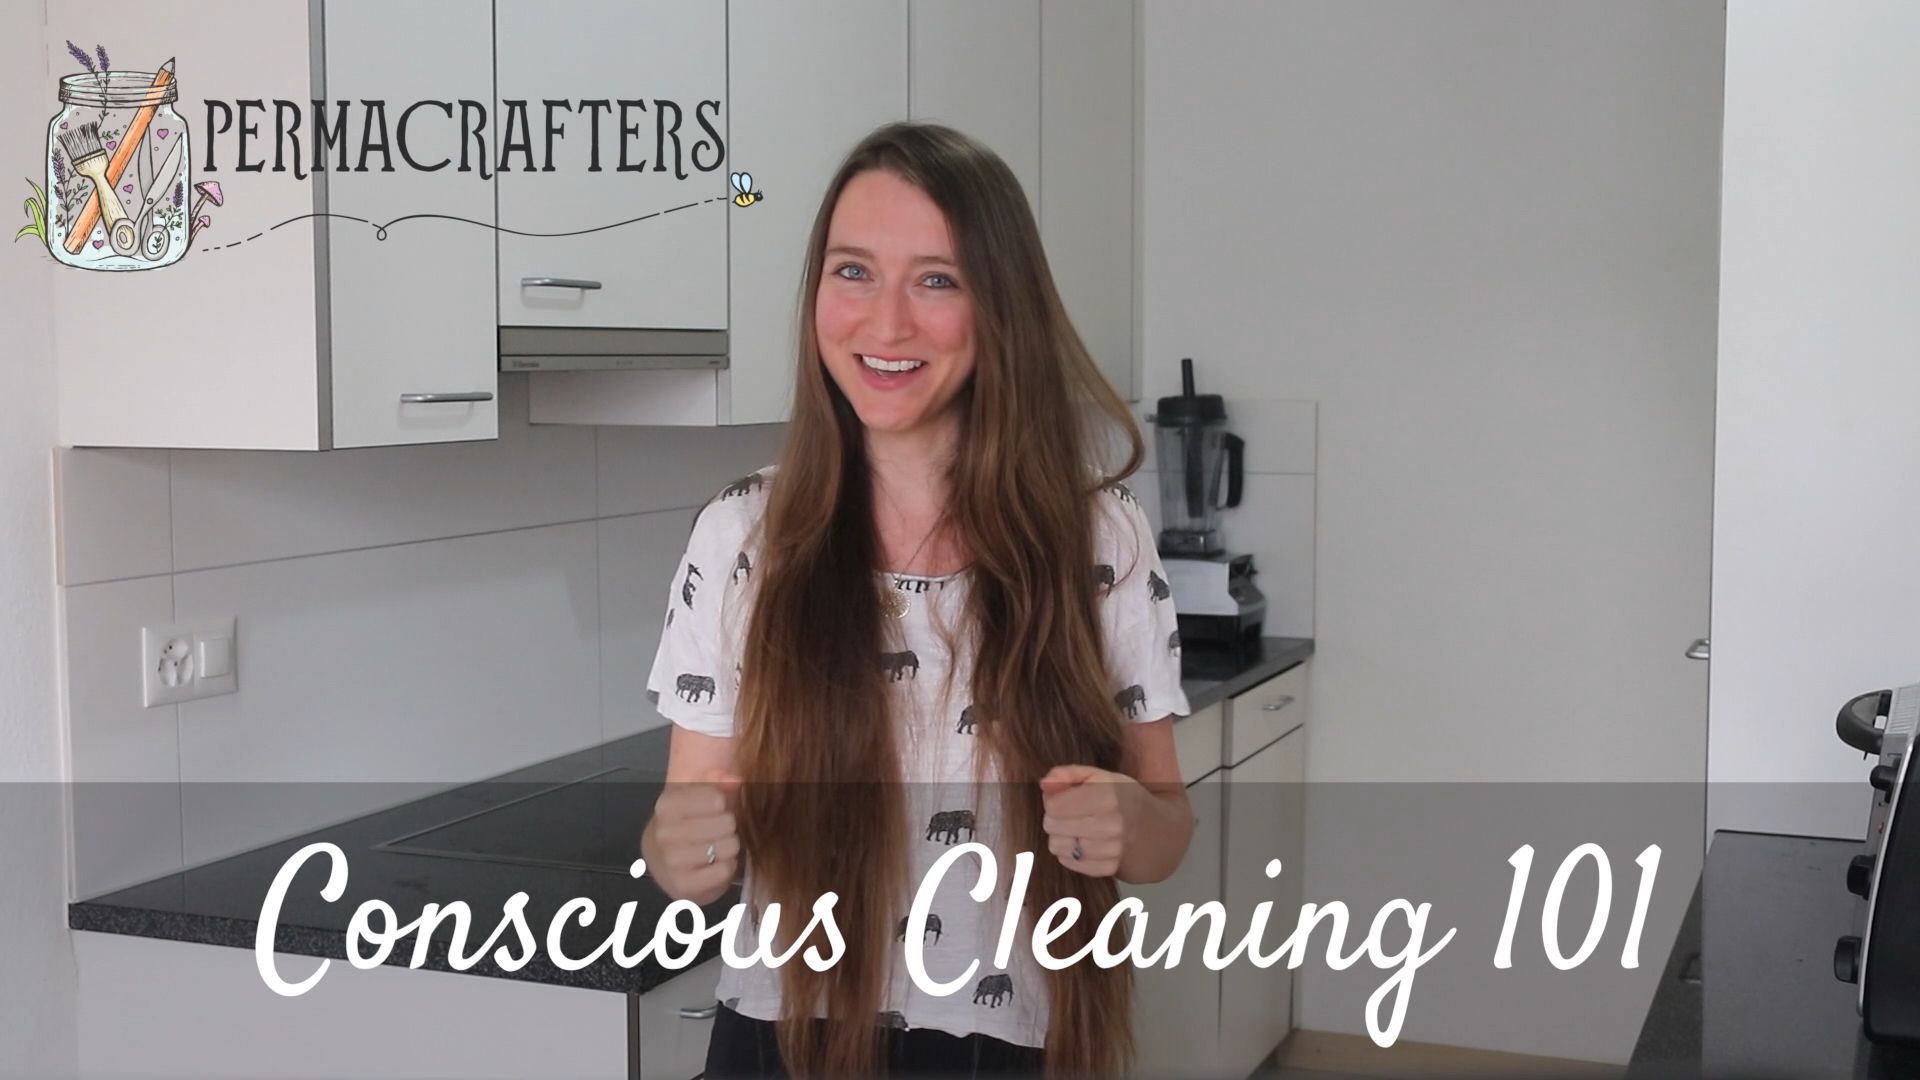 Conscious Cleaning 101: A Green Cleaning workshop minus the Greenwashing B.S.! -   15 skin care Videos organization ideas